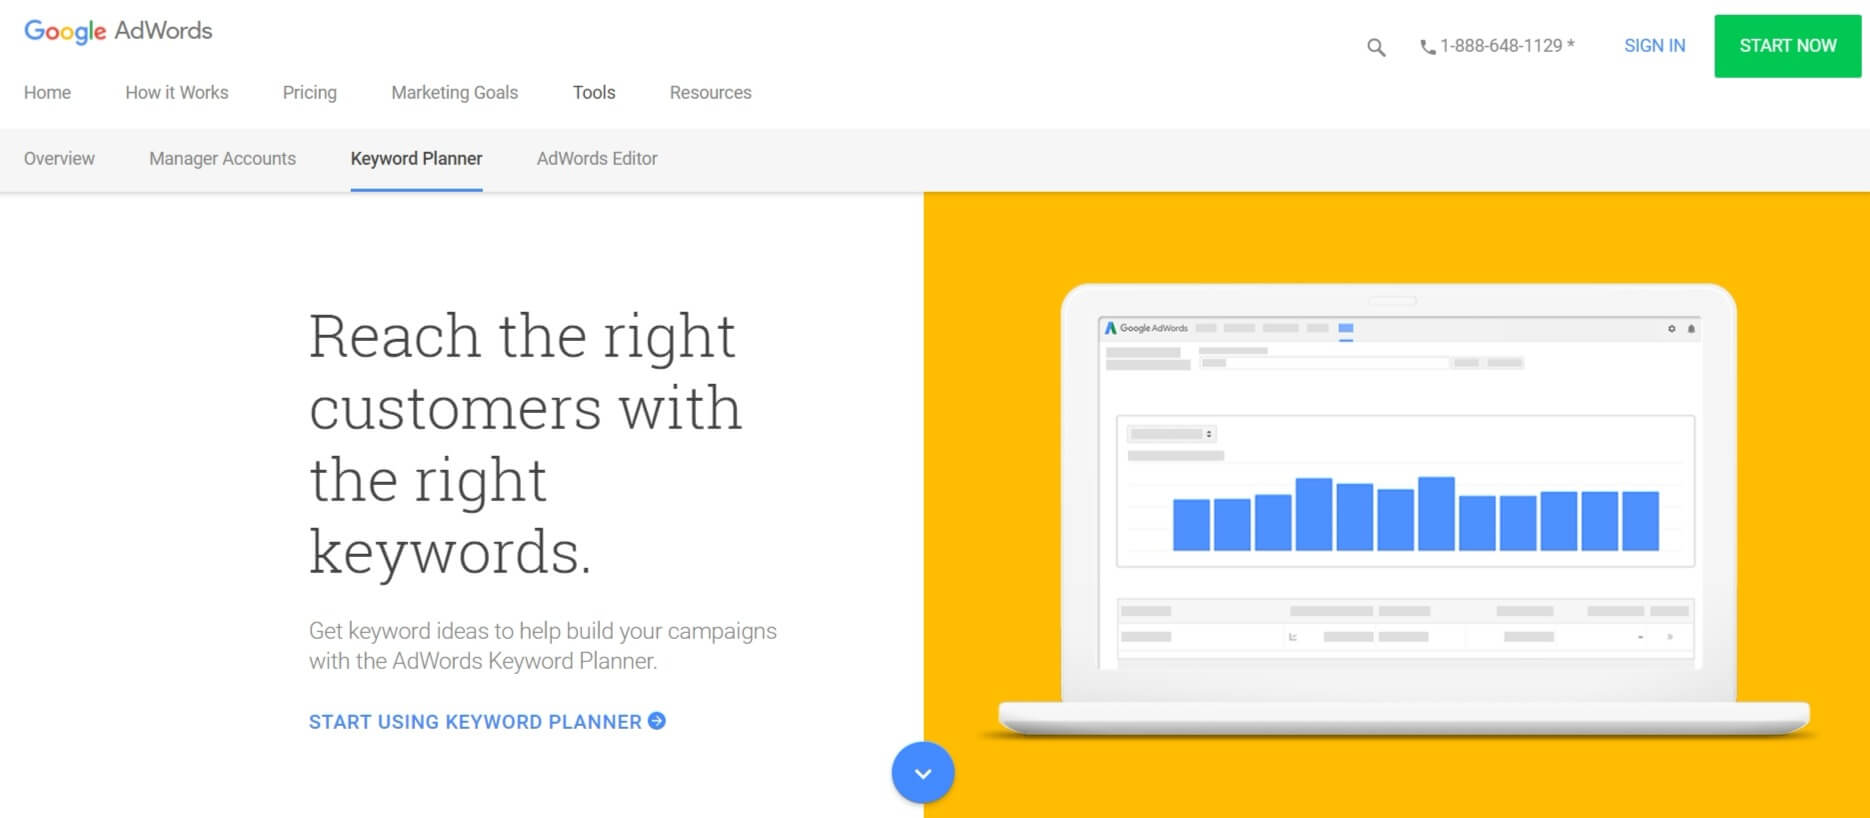 The Google AdWords homepage